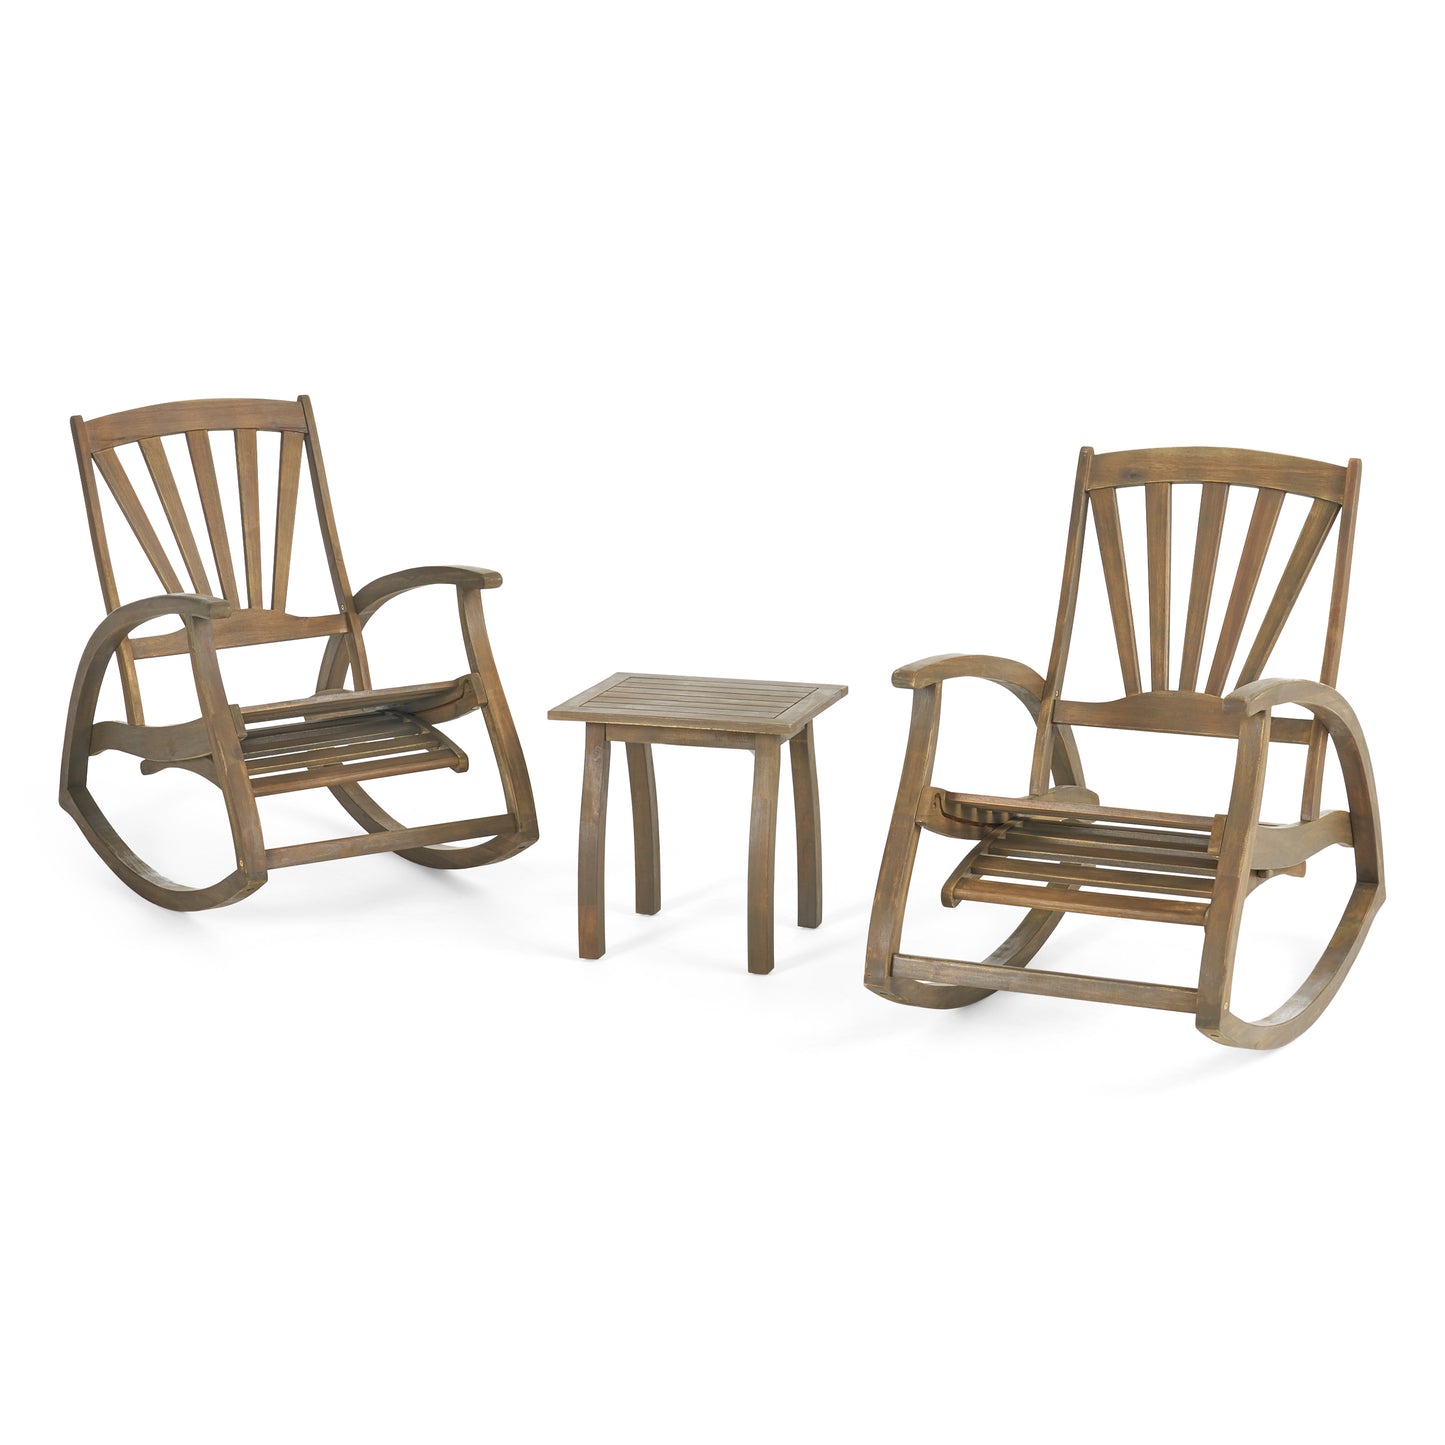 Sunview Outdoor Rustic Acacia Wood Recliner Rocking Chair with Side Table